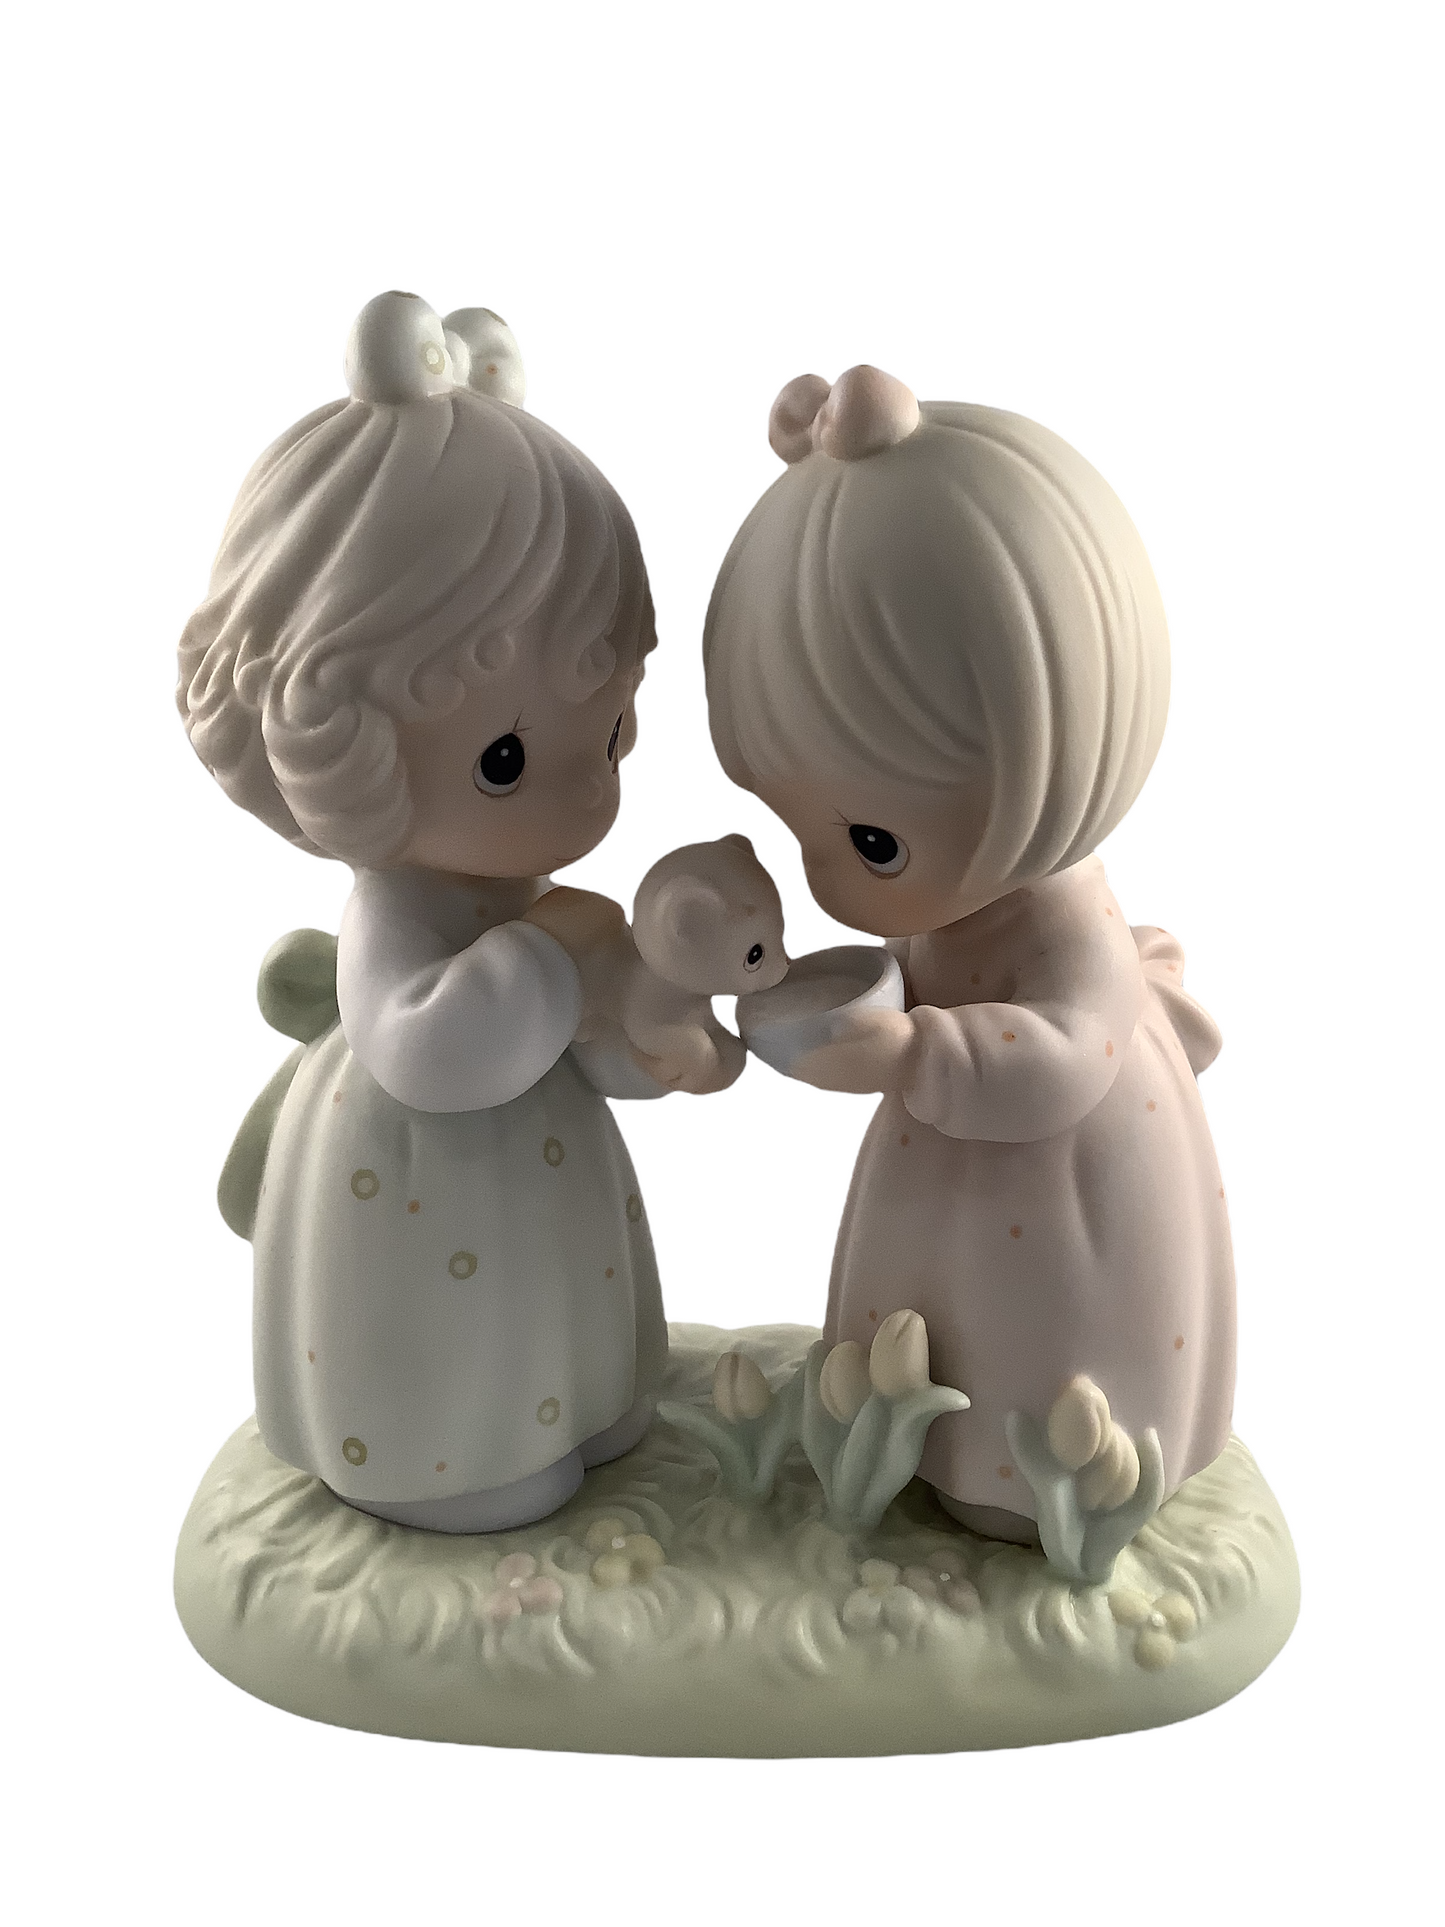 I'm So Glad That God Has Blessed Me With A Friend Like You - Precious Moment Figurine